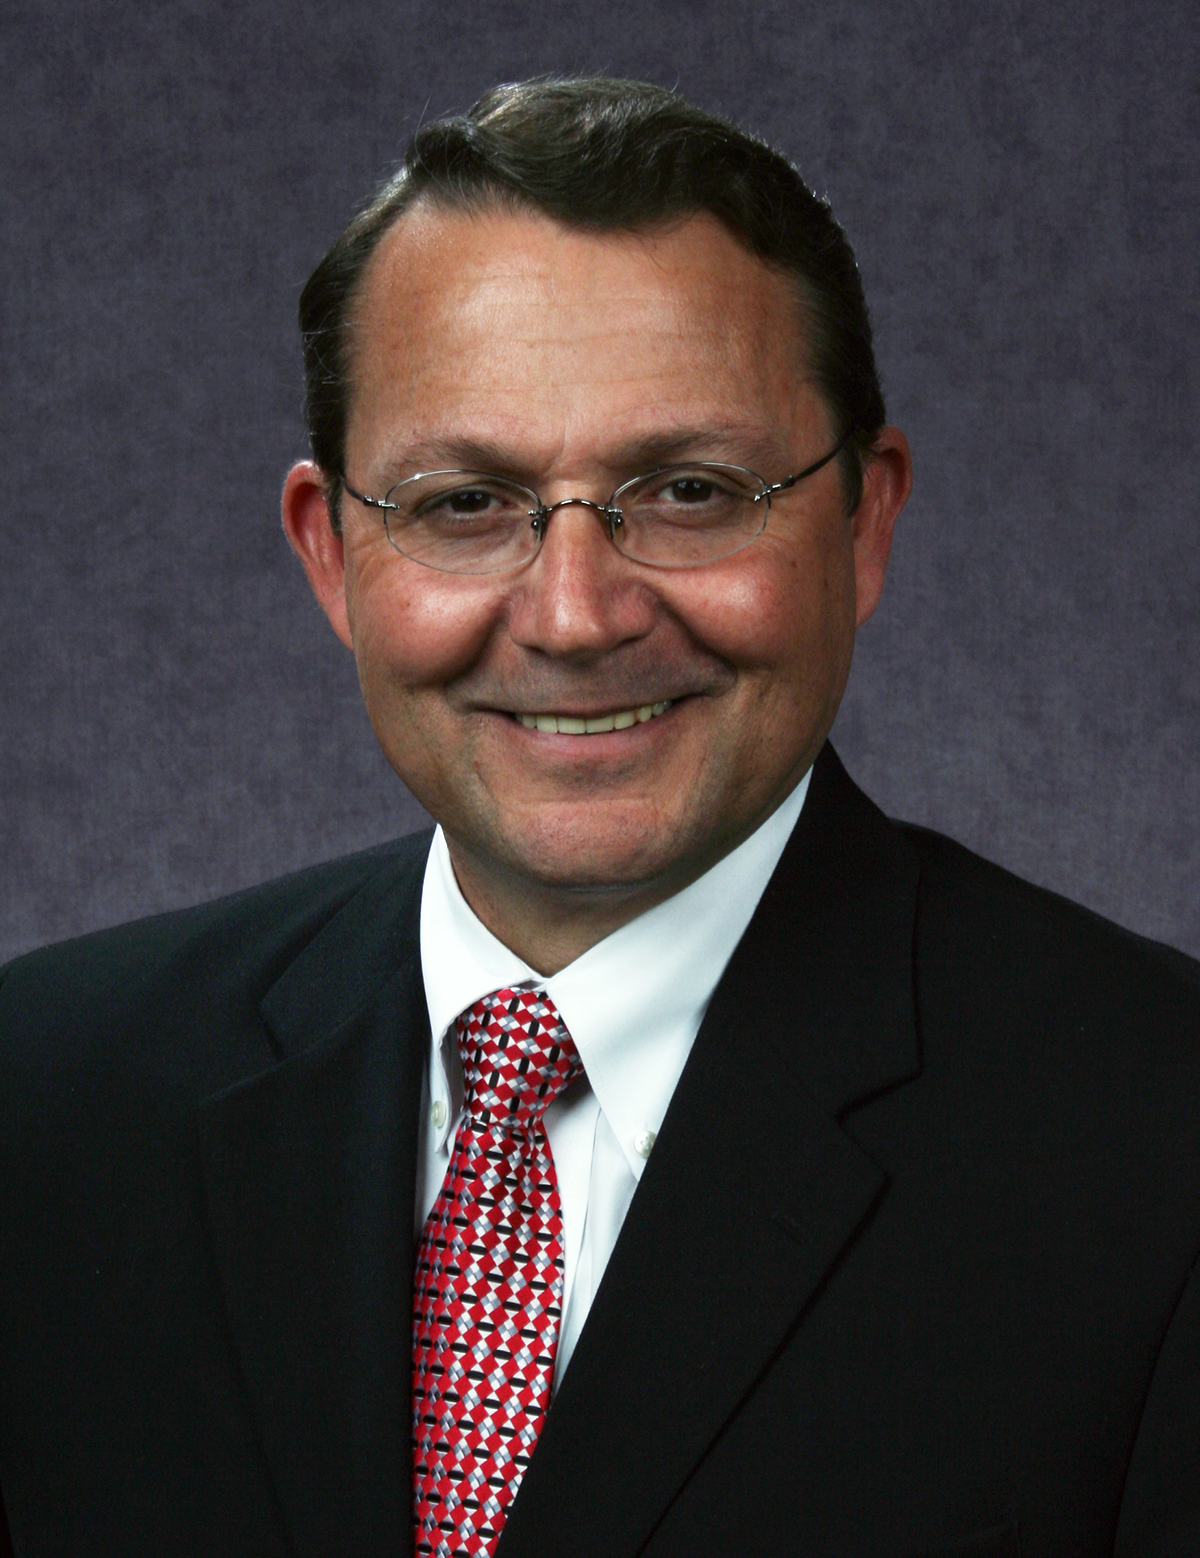 Scott Reitsma will be retiring as Senior Vice President, Ministry Development Group at Christian Community Credit Union effective March 1, 2021.